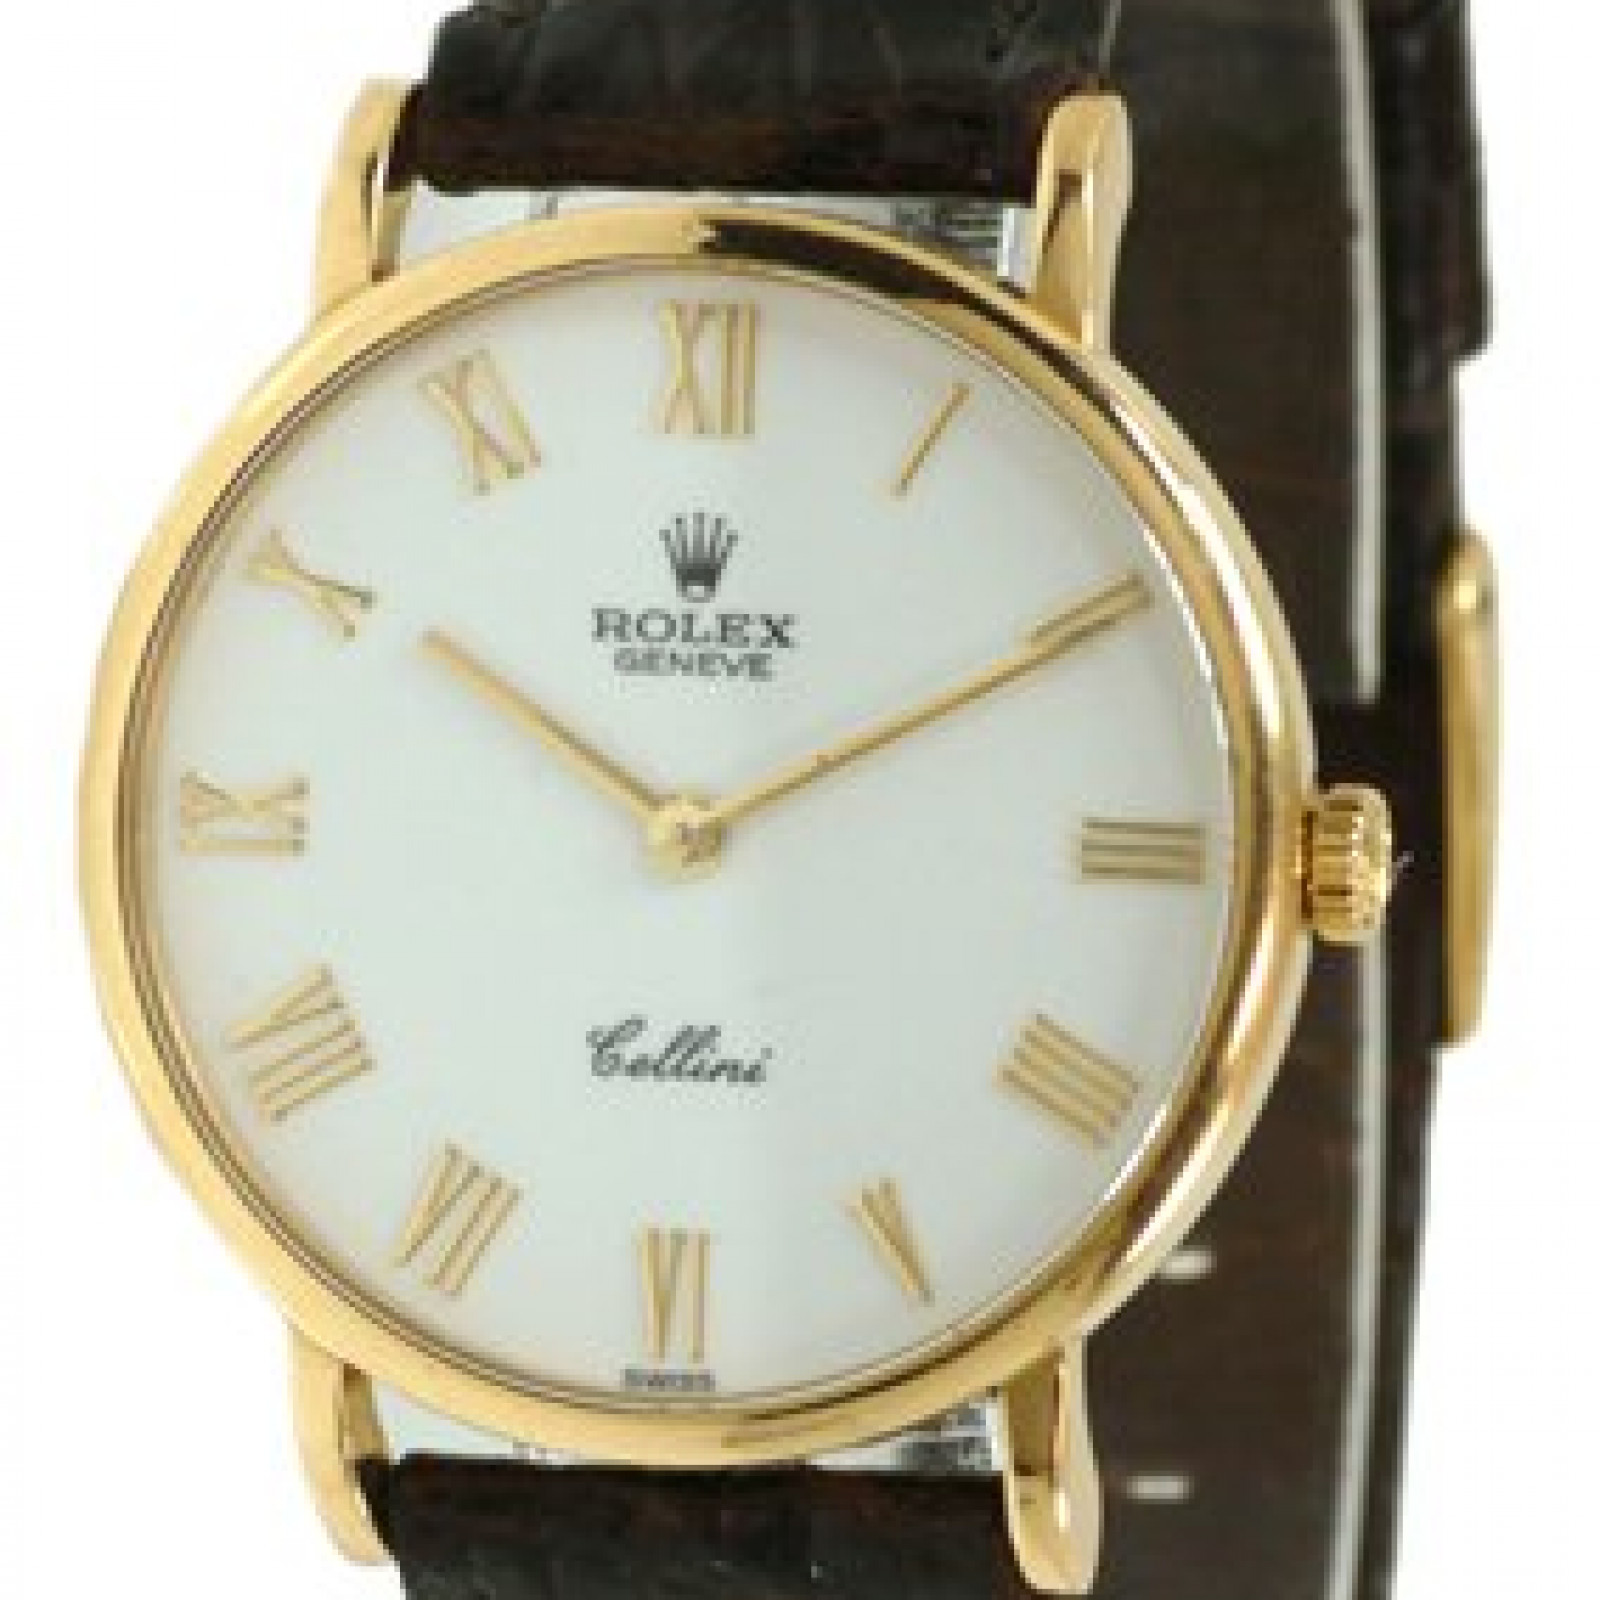 Pre-Owned Rolex Cellini 5112 Gold Year 1992